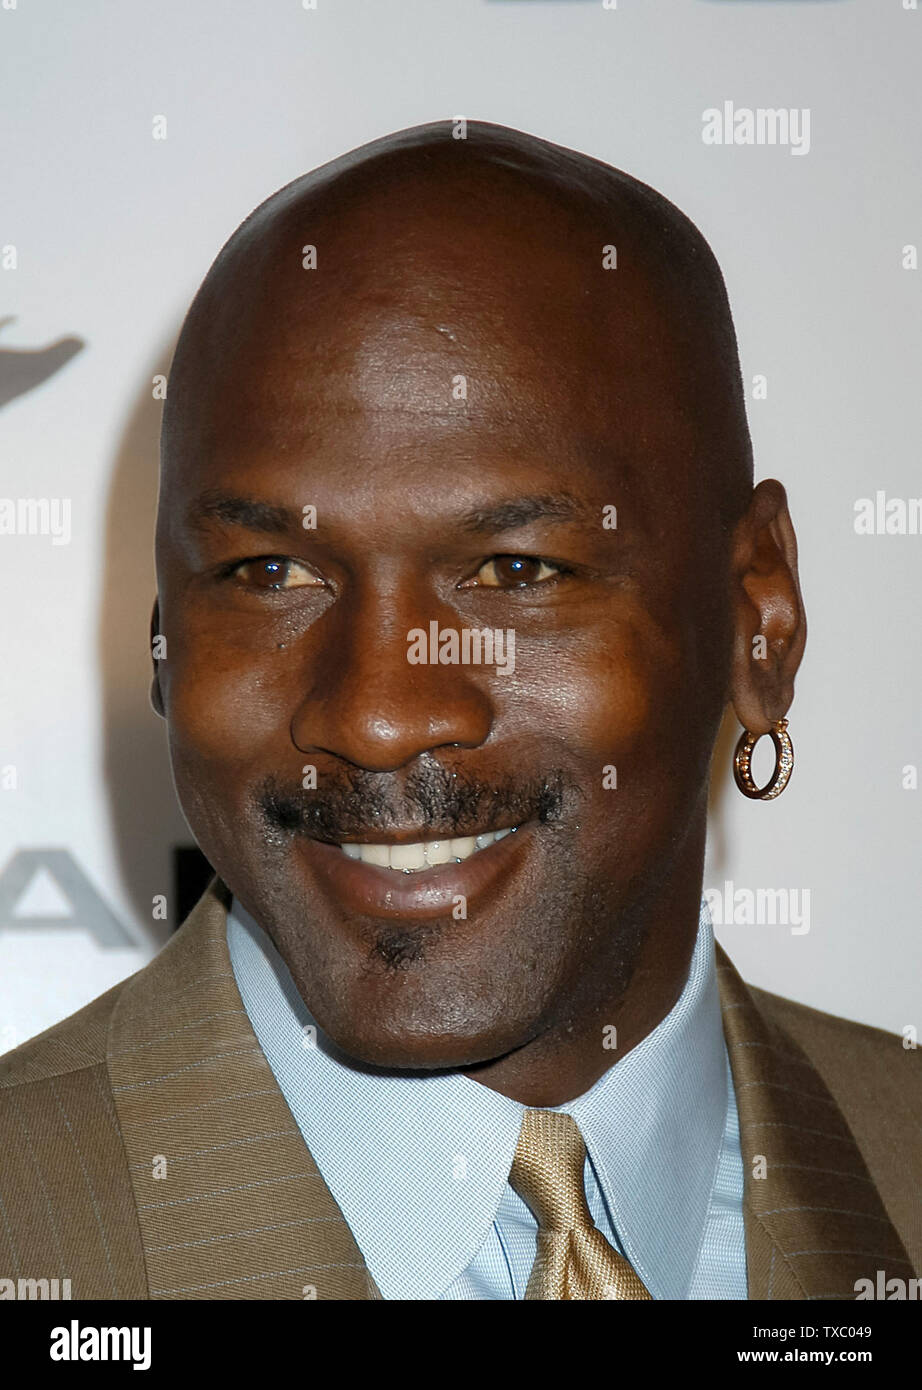 michael-jordan-at-jordans-nba-all-star-comedy-court-and-celebrity-after-party-at-the-wadsworth-theatre-in-los-angeles-ca-the-event-took-place-on-friday-february-13-2004-photo-by-sbm-picturelux-file-reference-33790-4274smbplx-TXC049.jpg